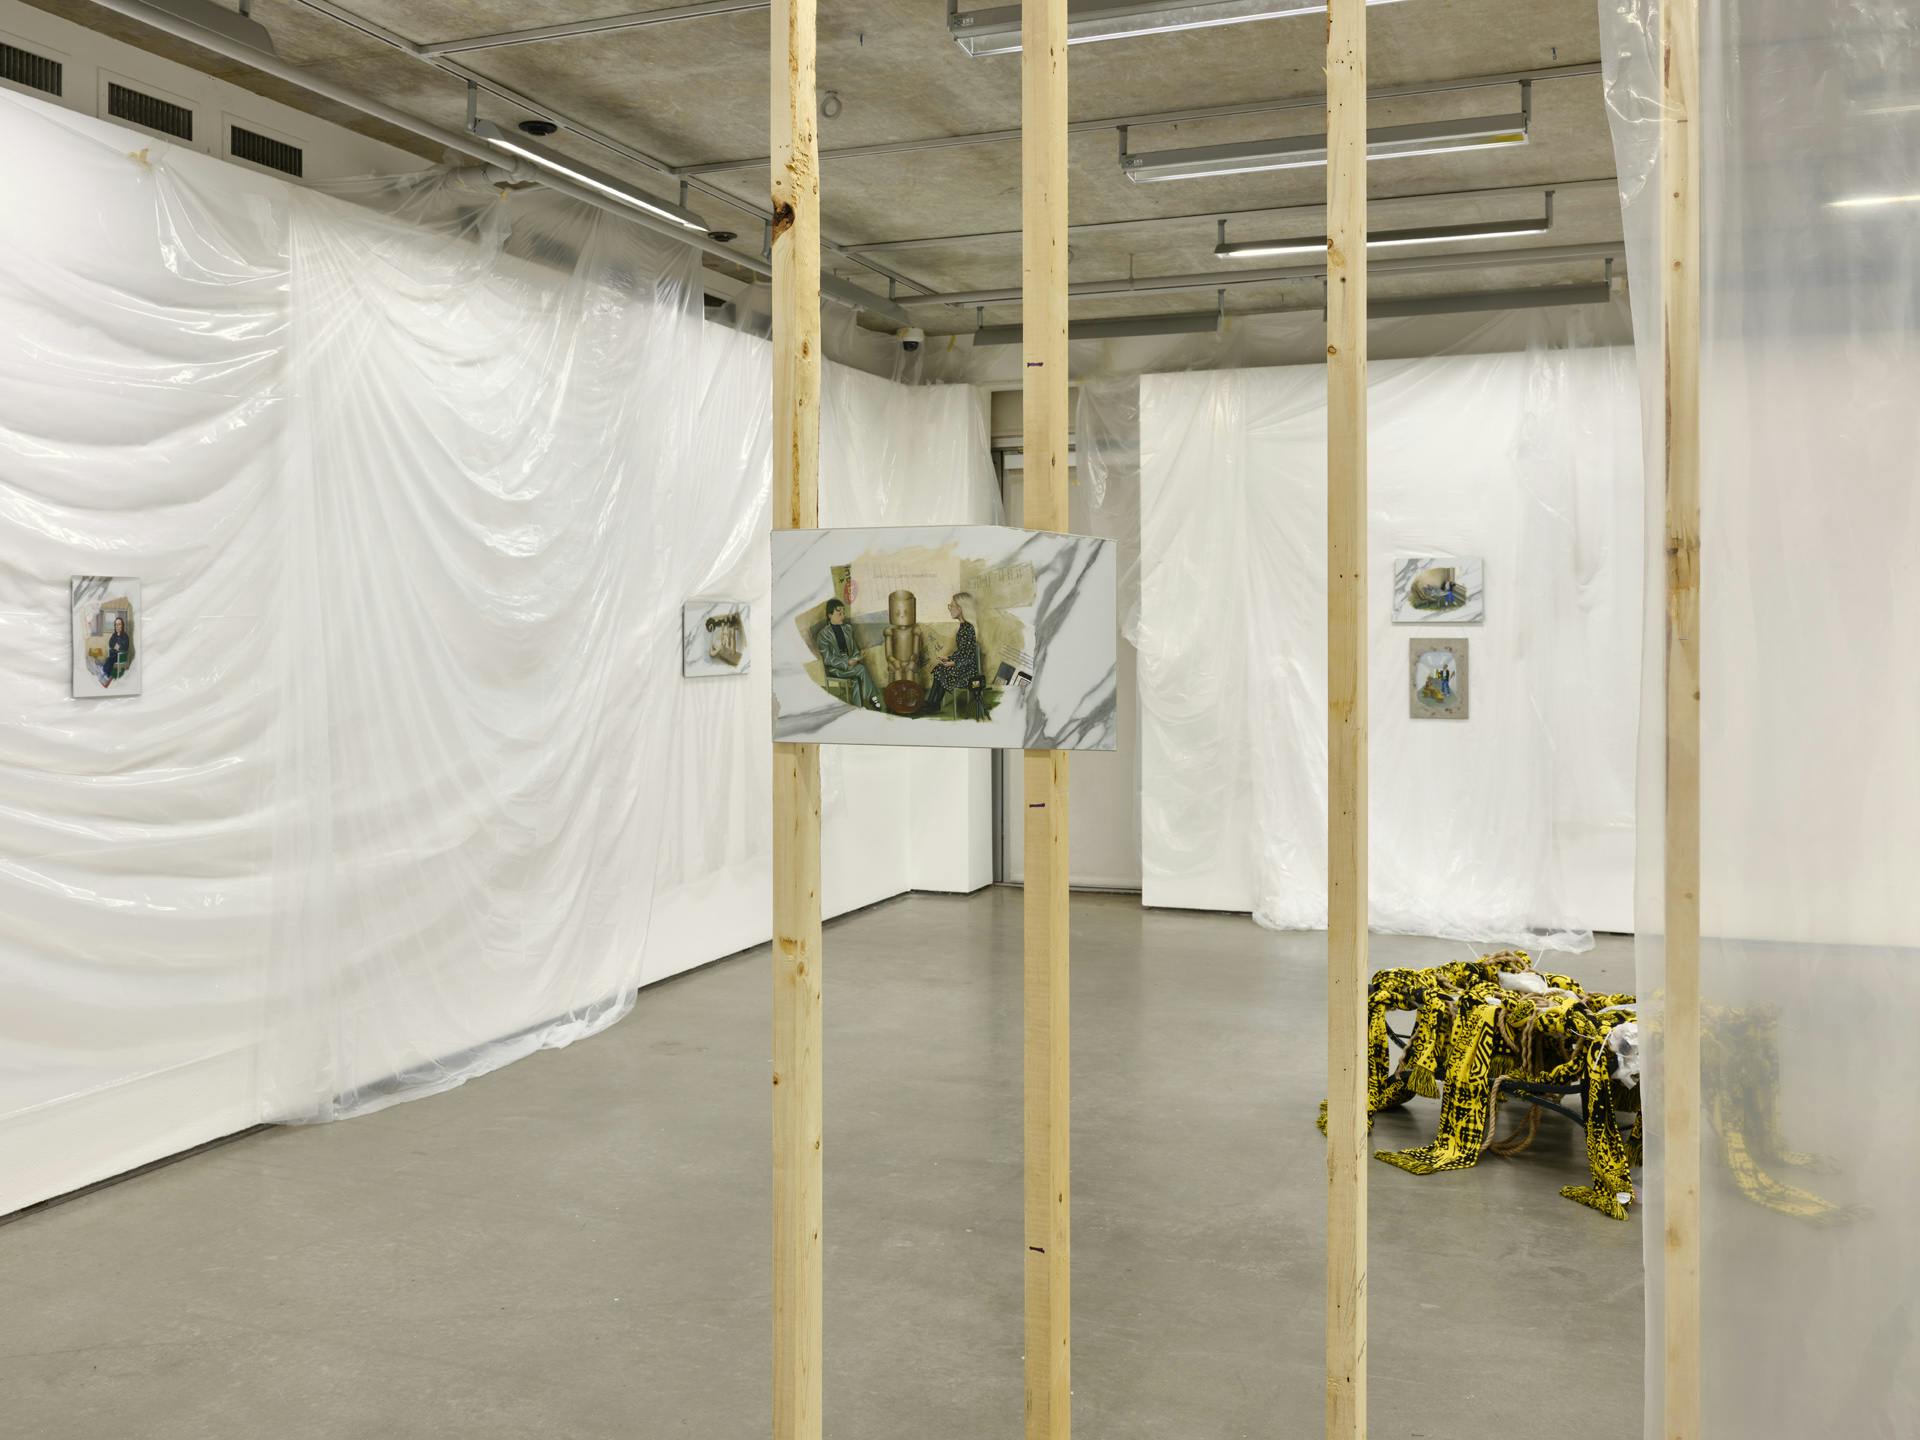 An unfinished wooden wall structure in a gallery space, on which hangs a painting on faux-marble tile. More paintings hanging on the gallery walls and a sculpture are visible through the wall structure. 